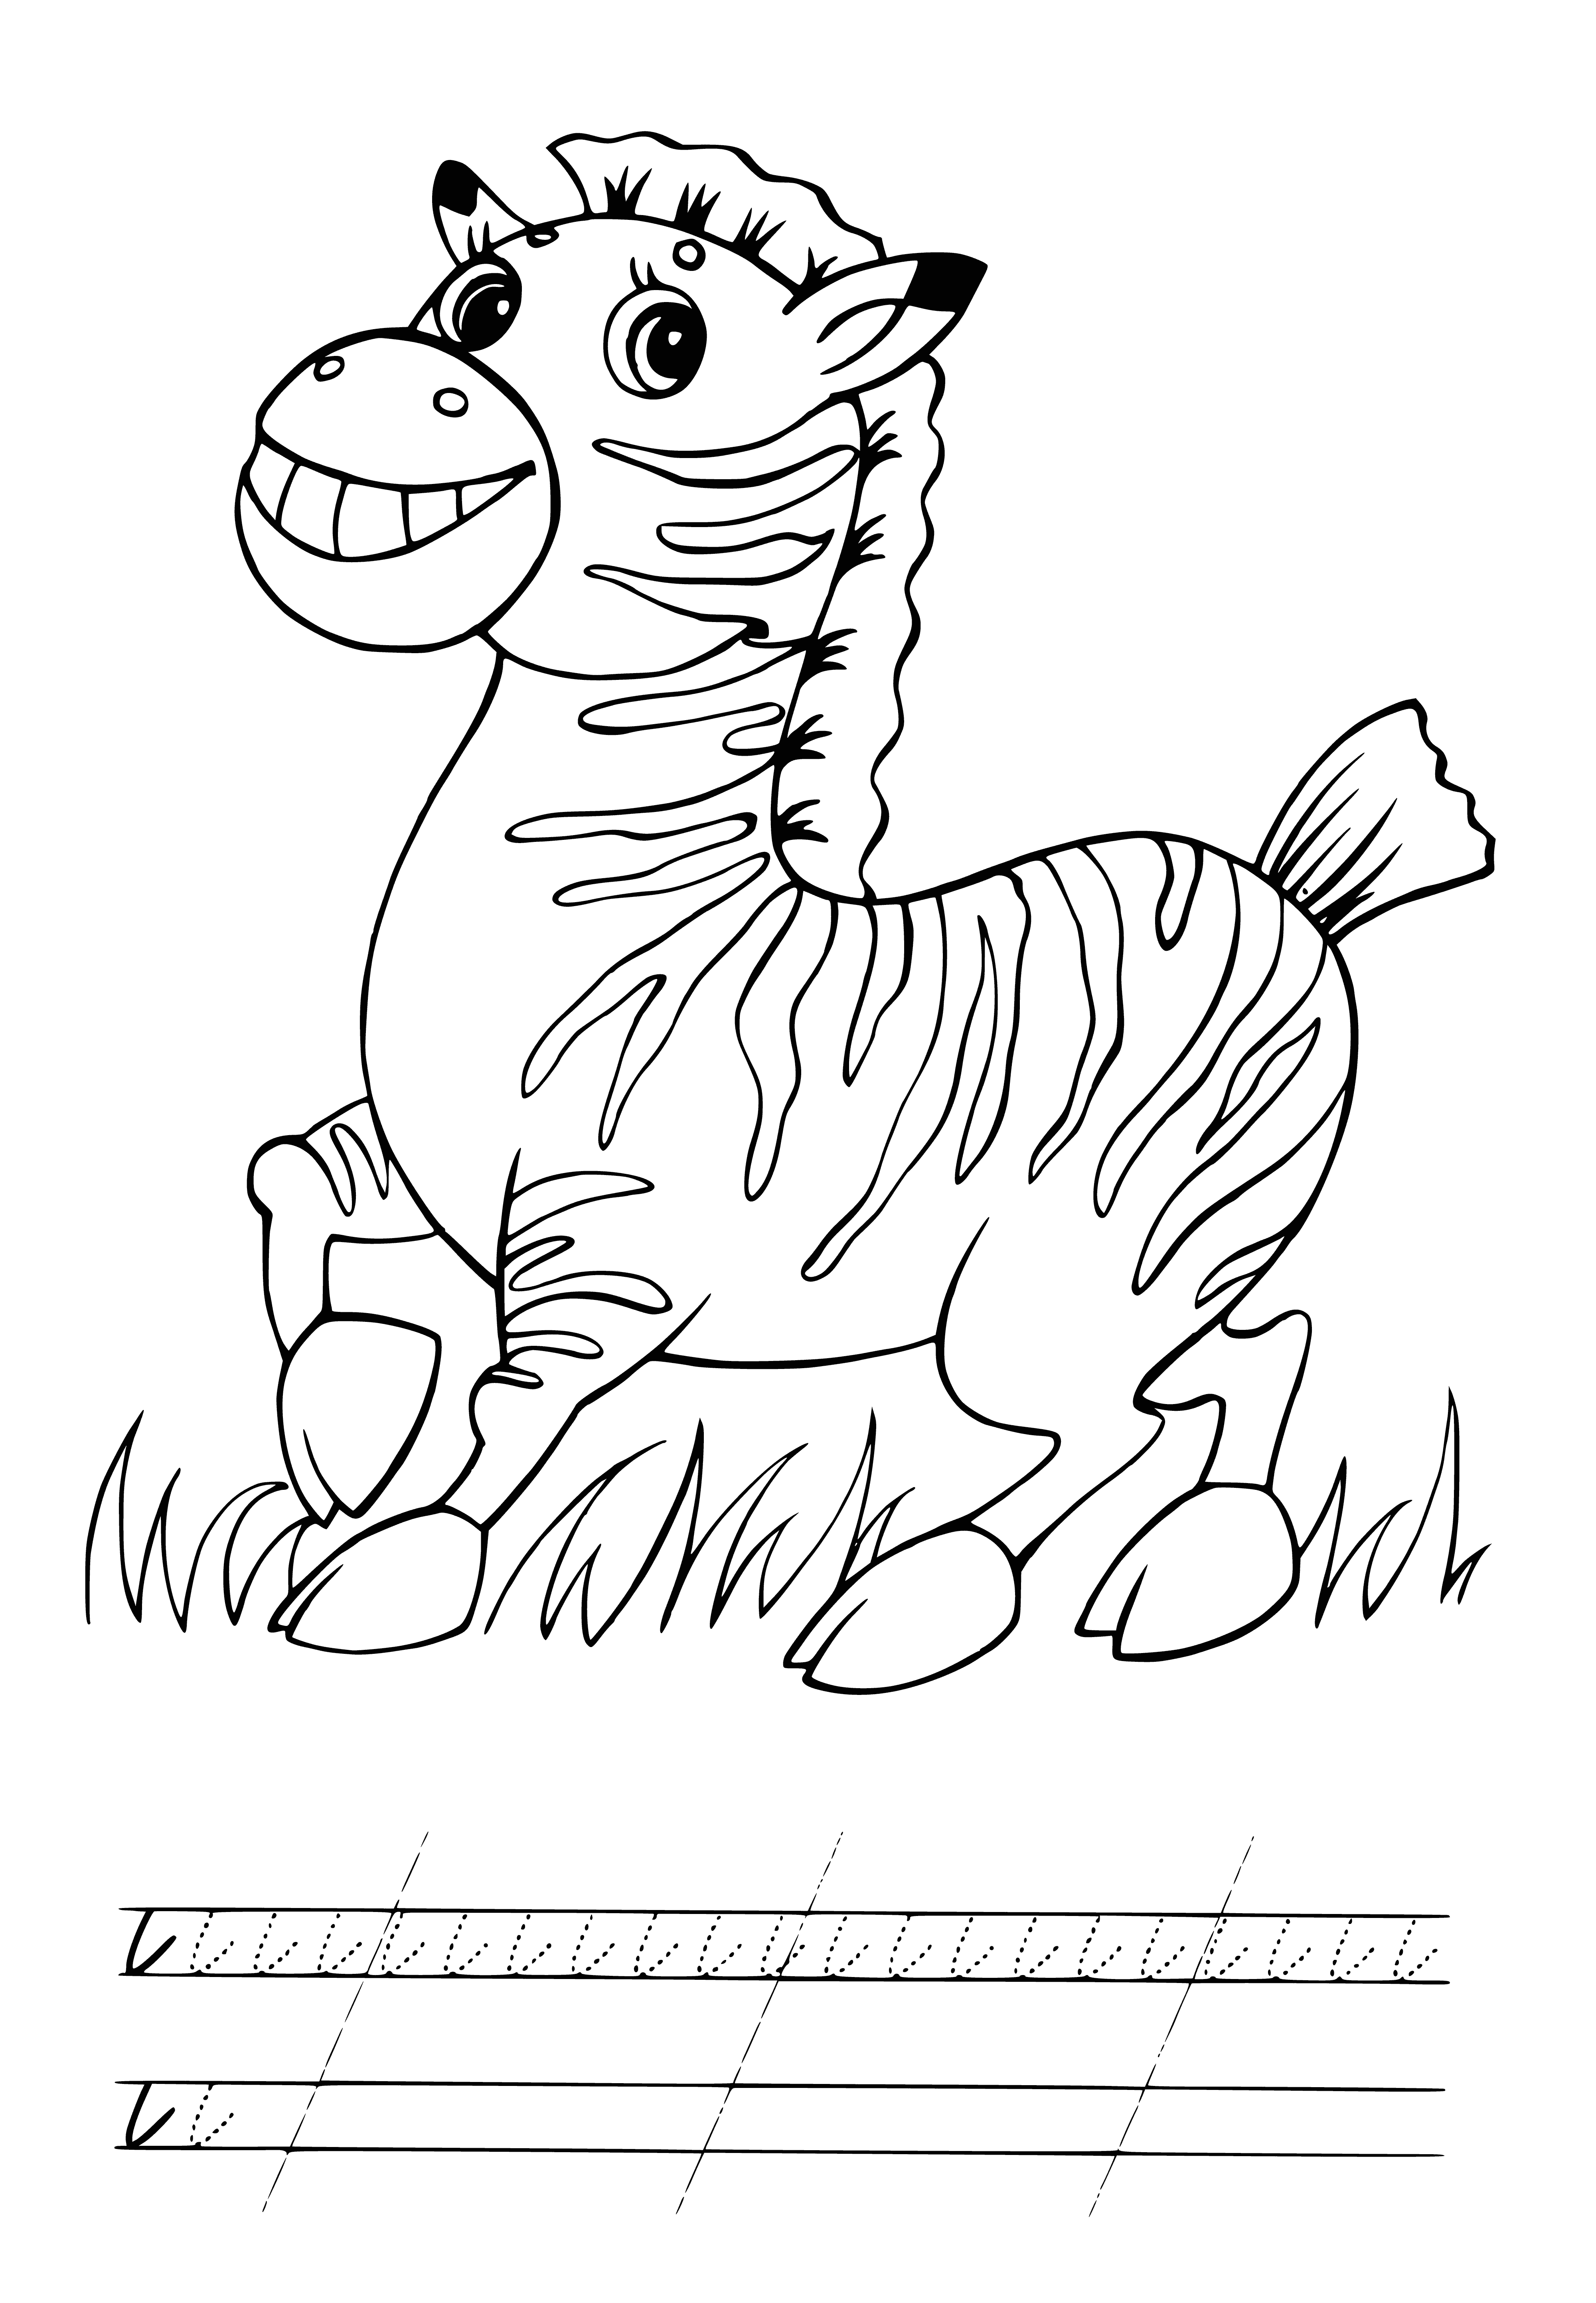 coloring page: Make zebra stew in 1 pot using 1 onion, 1 carrot, 1 celery stalk, beef broth, bay leaf, salt, pepper, flour, red wine & chopped parsley. #yum